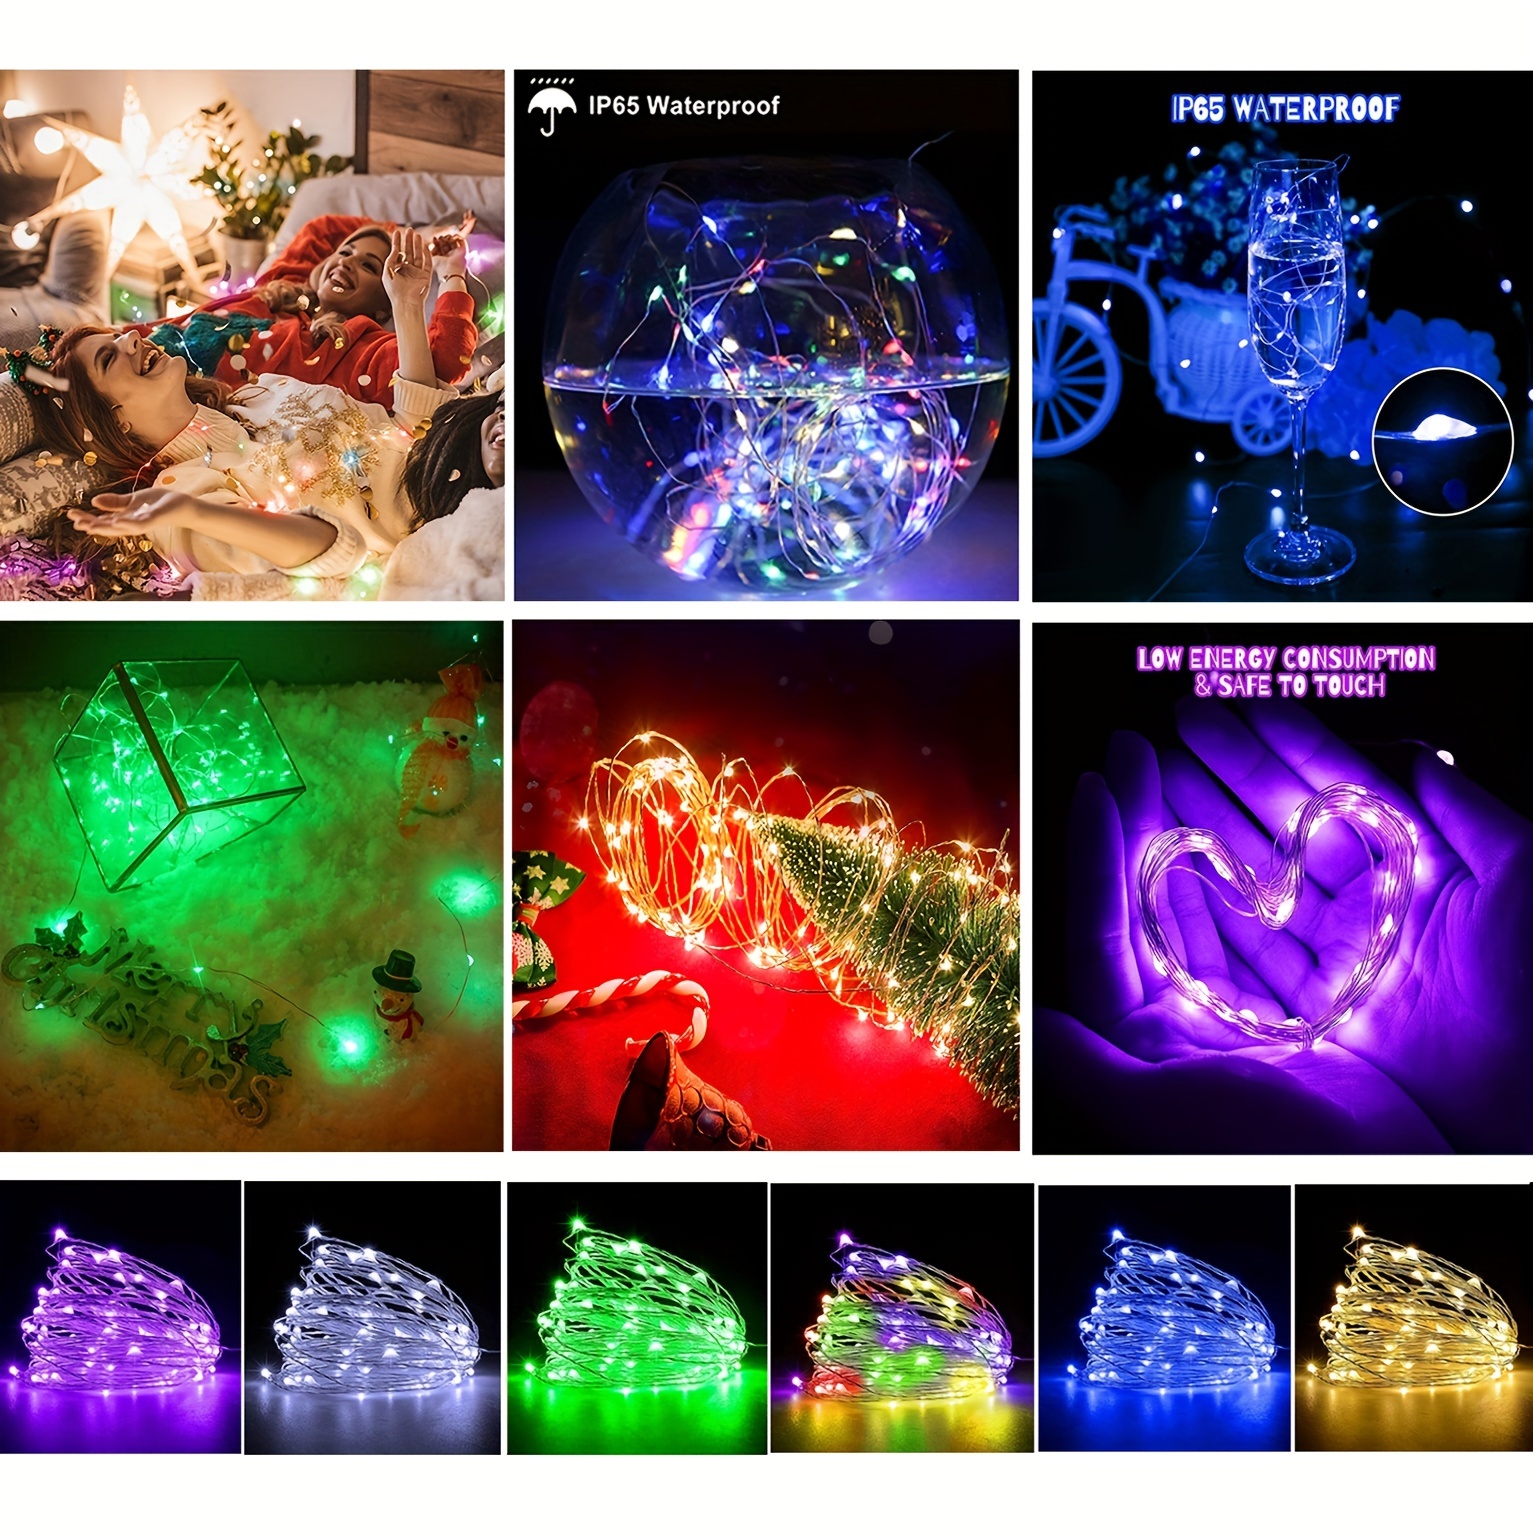 10 mini led string lights battery operated waterproof starry firefly lights perfect for home decor weddings details 1